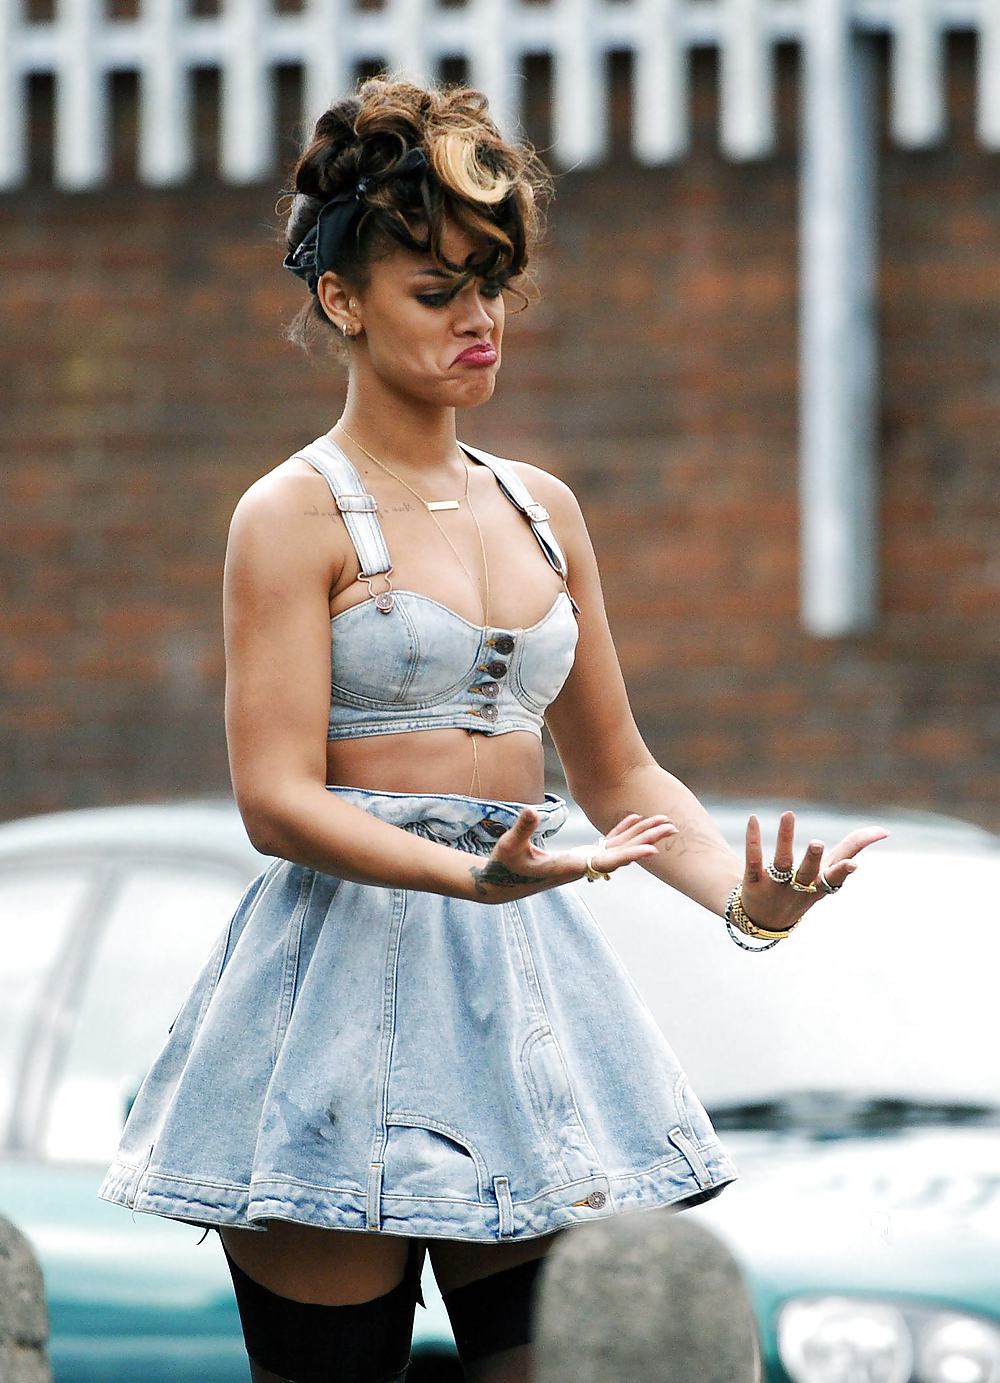 Rihanna filming the music video We Found Love in Ireland #8290607